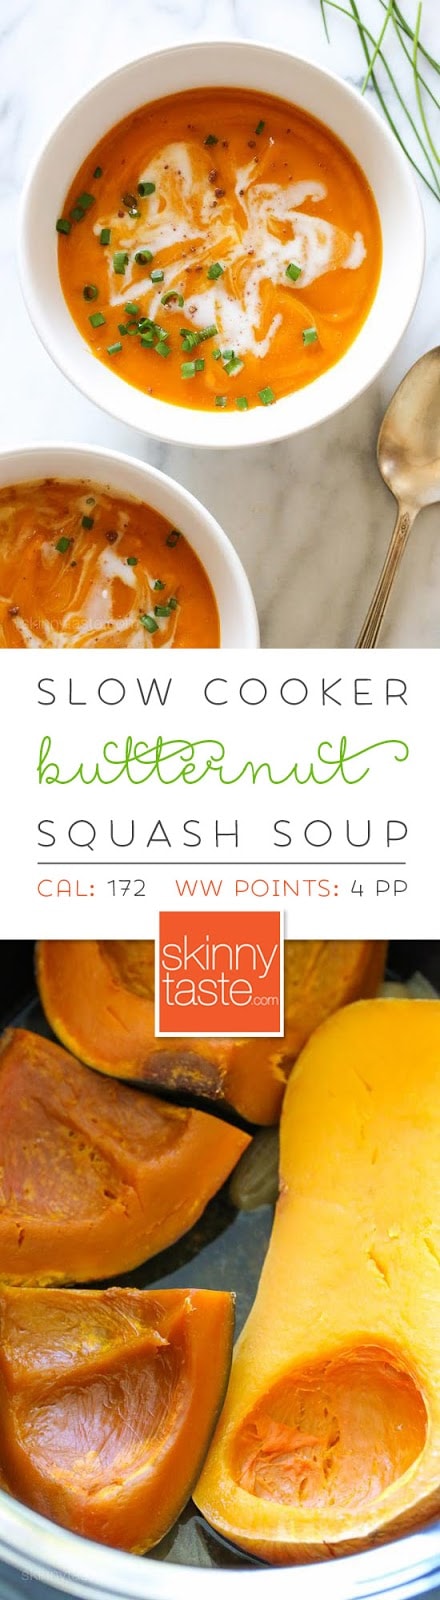 Slow Cooker Blissful Butternut Squash Soup – an EASY crock pot recipe with very little prep and only 6 ingredients!